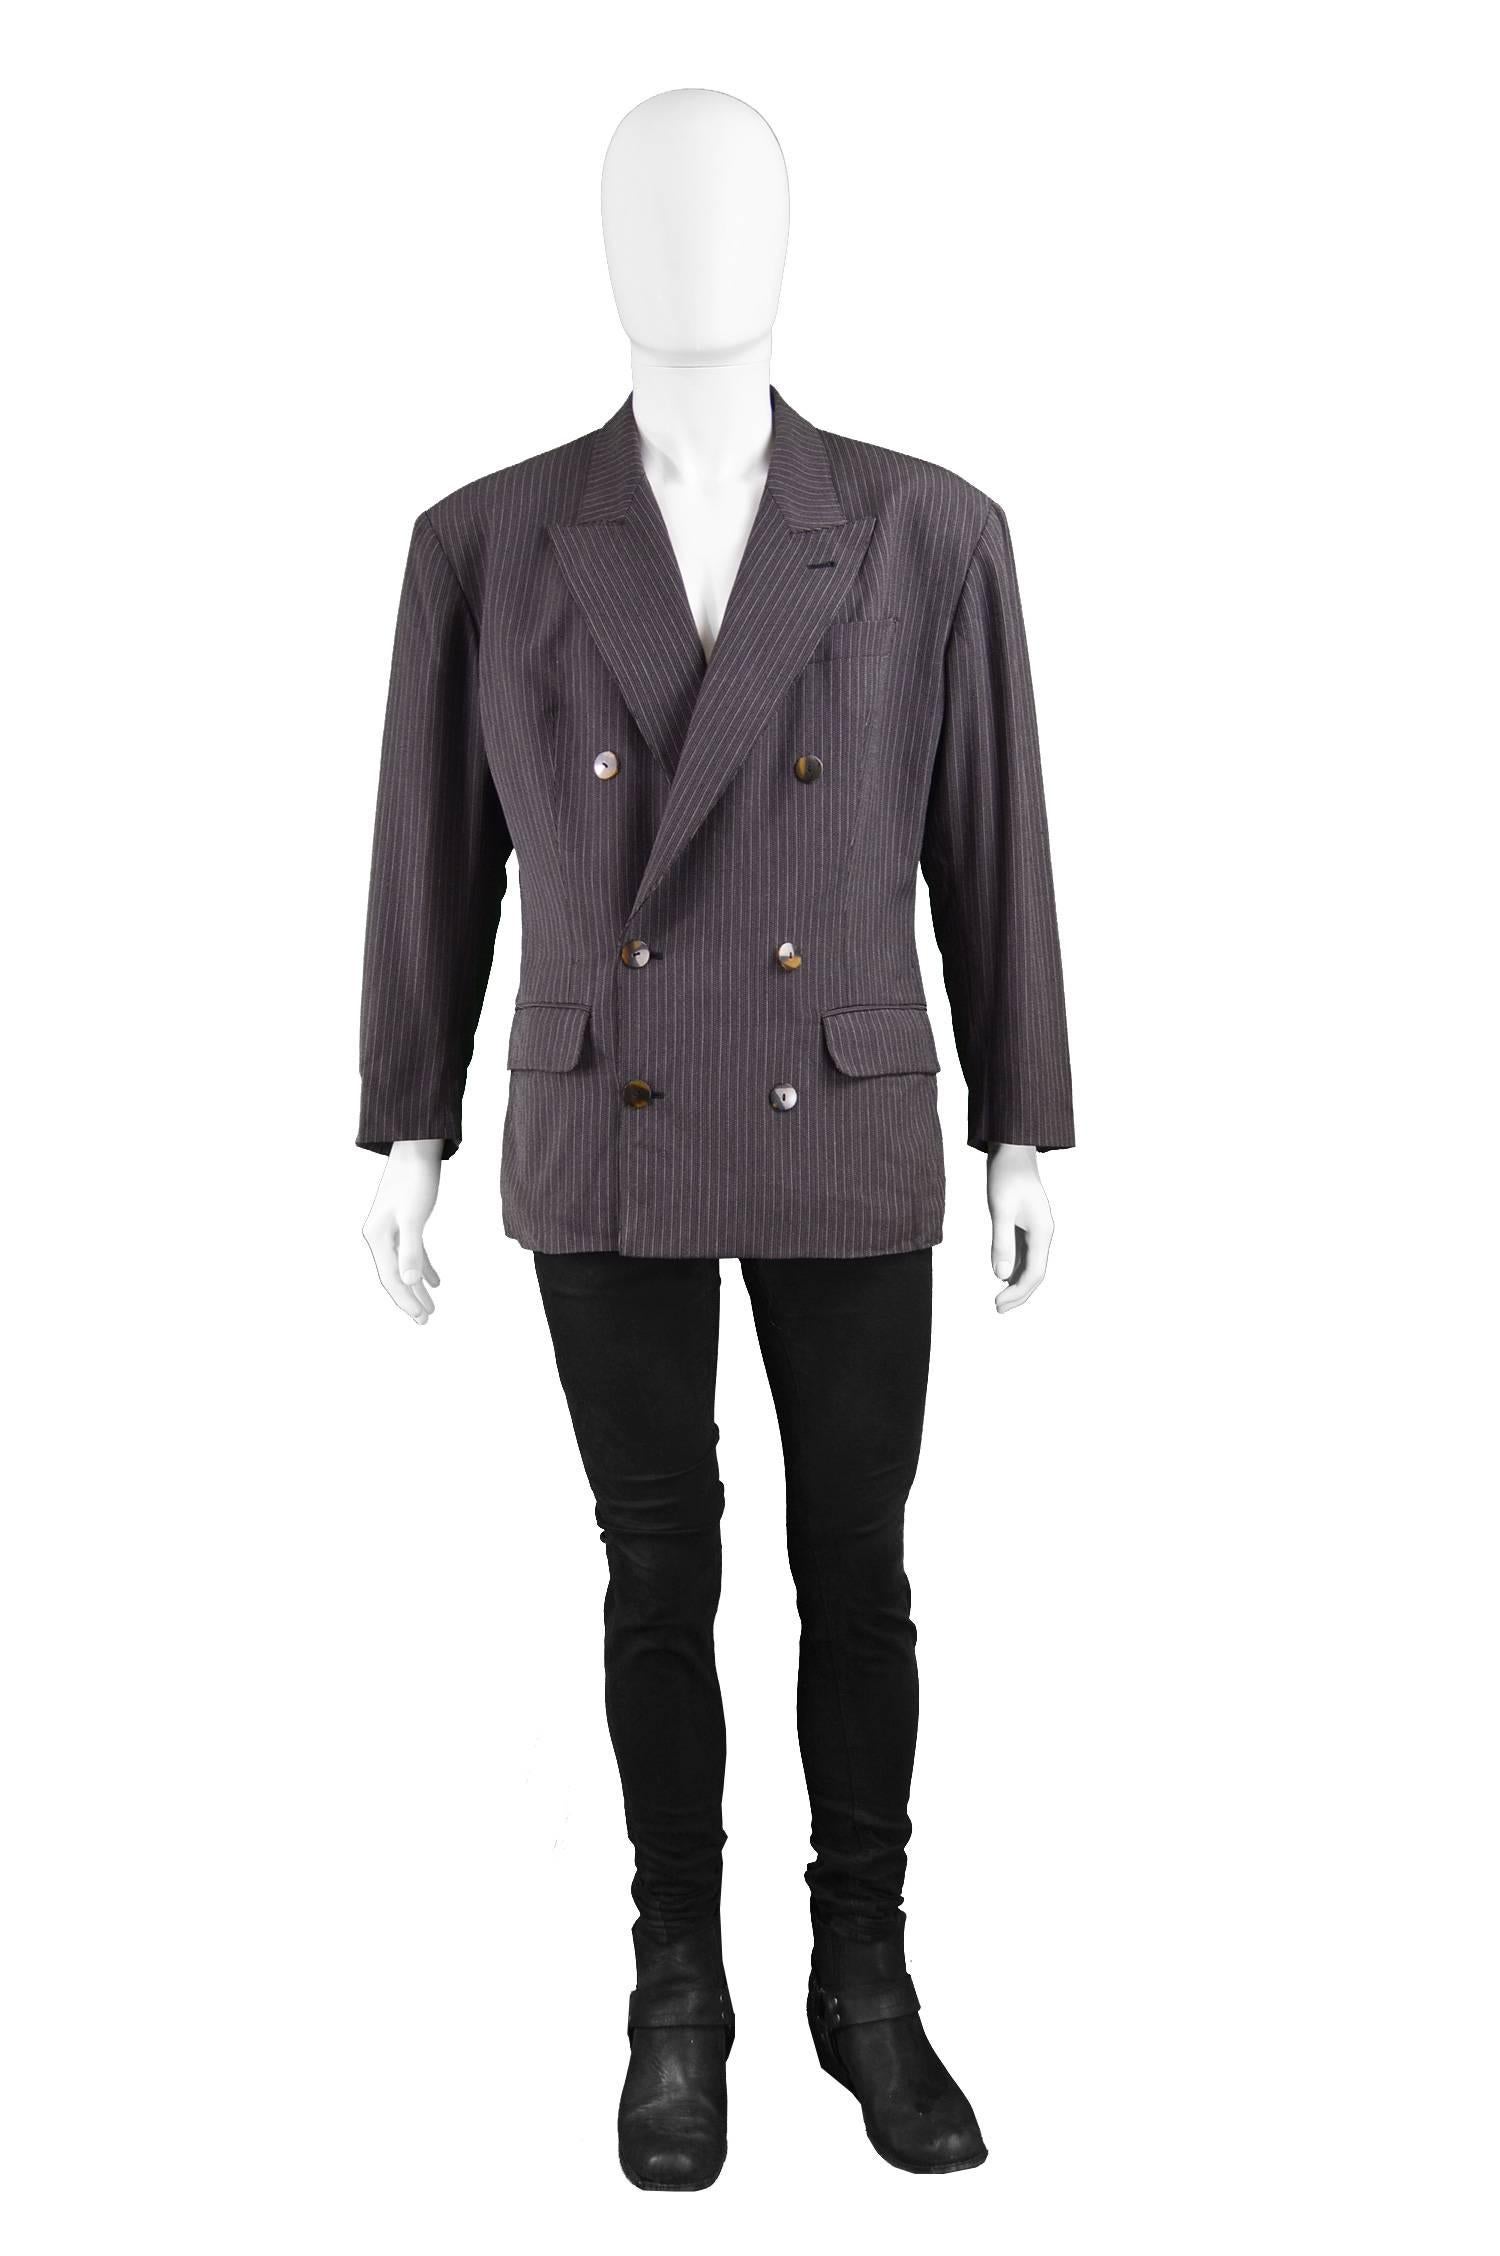 Jean Paul Gaultier Homme Pour Gibo Vintage Men's Double Breasted Blazer, 1980s

Size: Marked size 50 which is roughly a men’s Medium to Large. Please check measurements.
Chest - 44” / 111cm (has a slightly looser fit on chest to create Gaultier’s